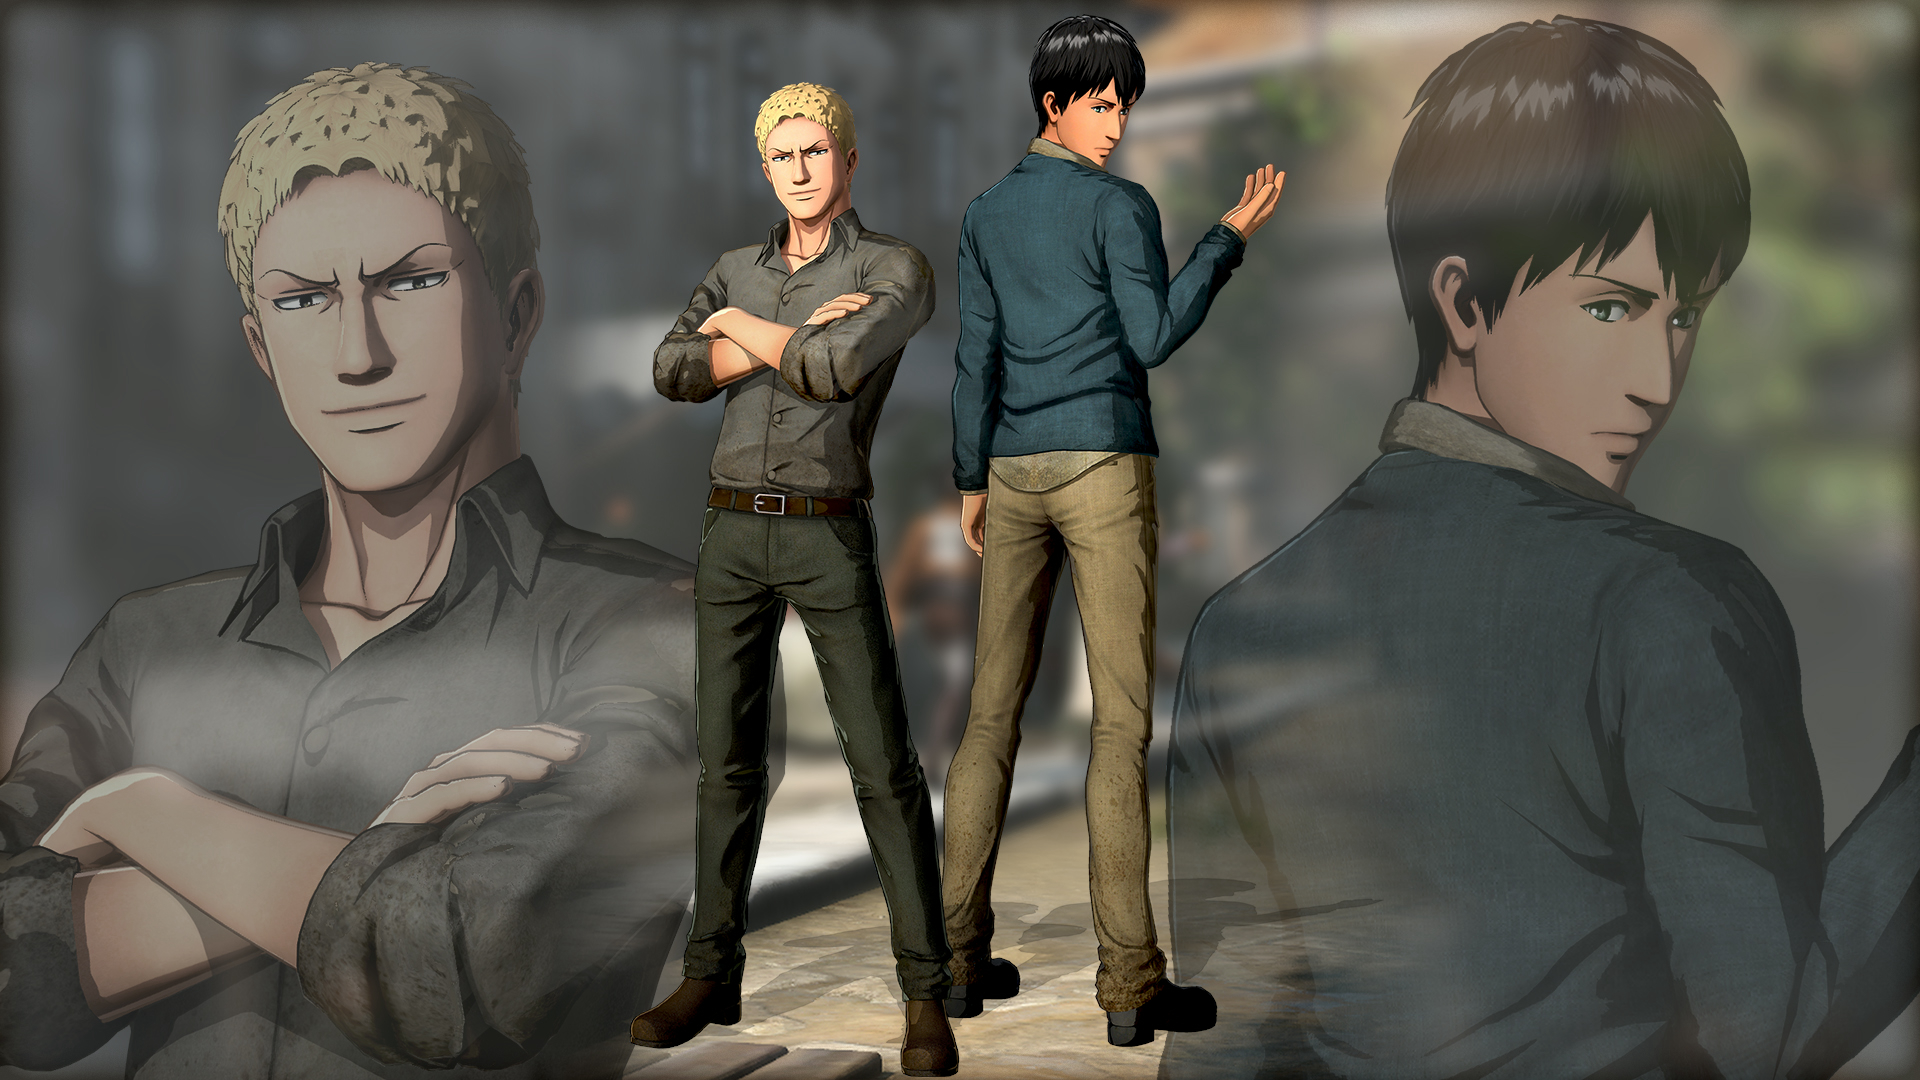 Attack on Titan 2: Reiner & Bertholdt "Plain clothes" Outfit Early Release